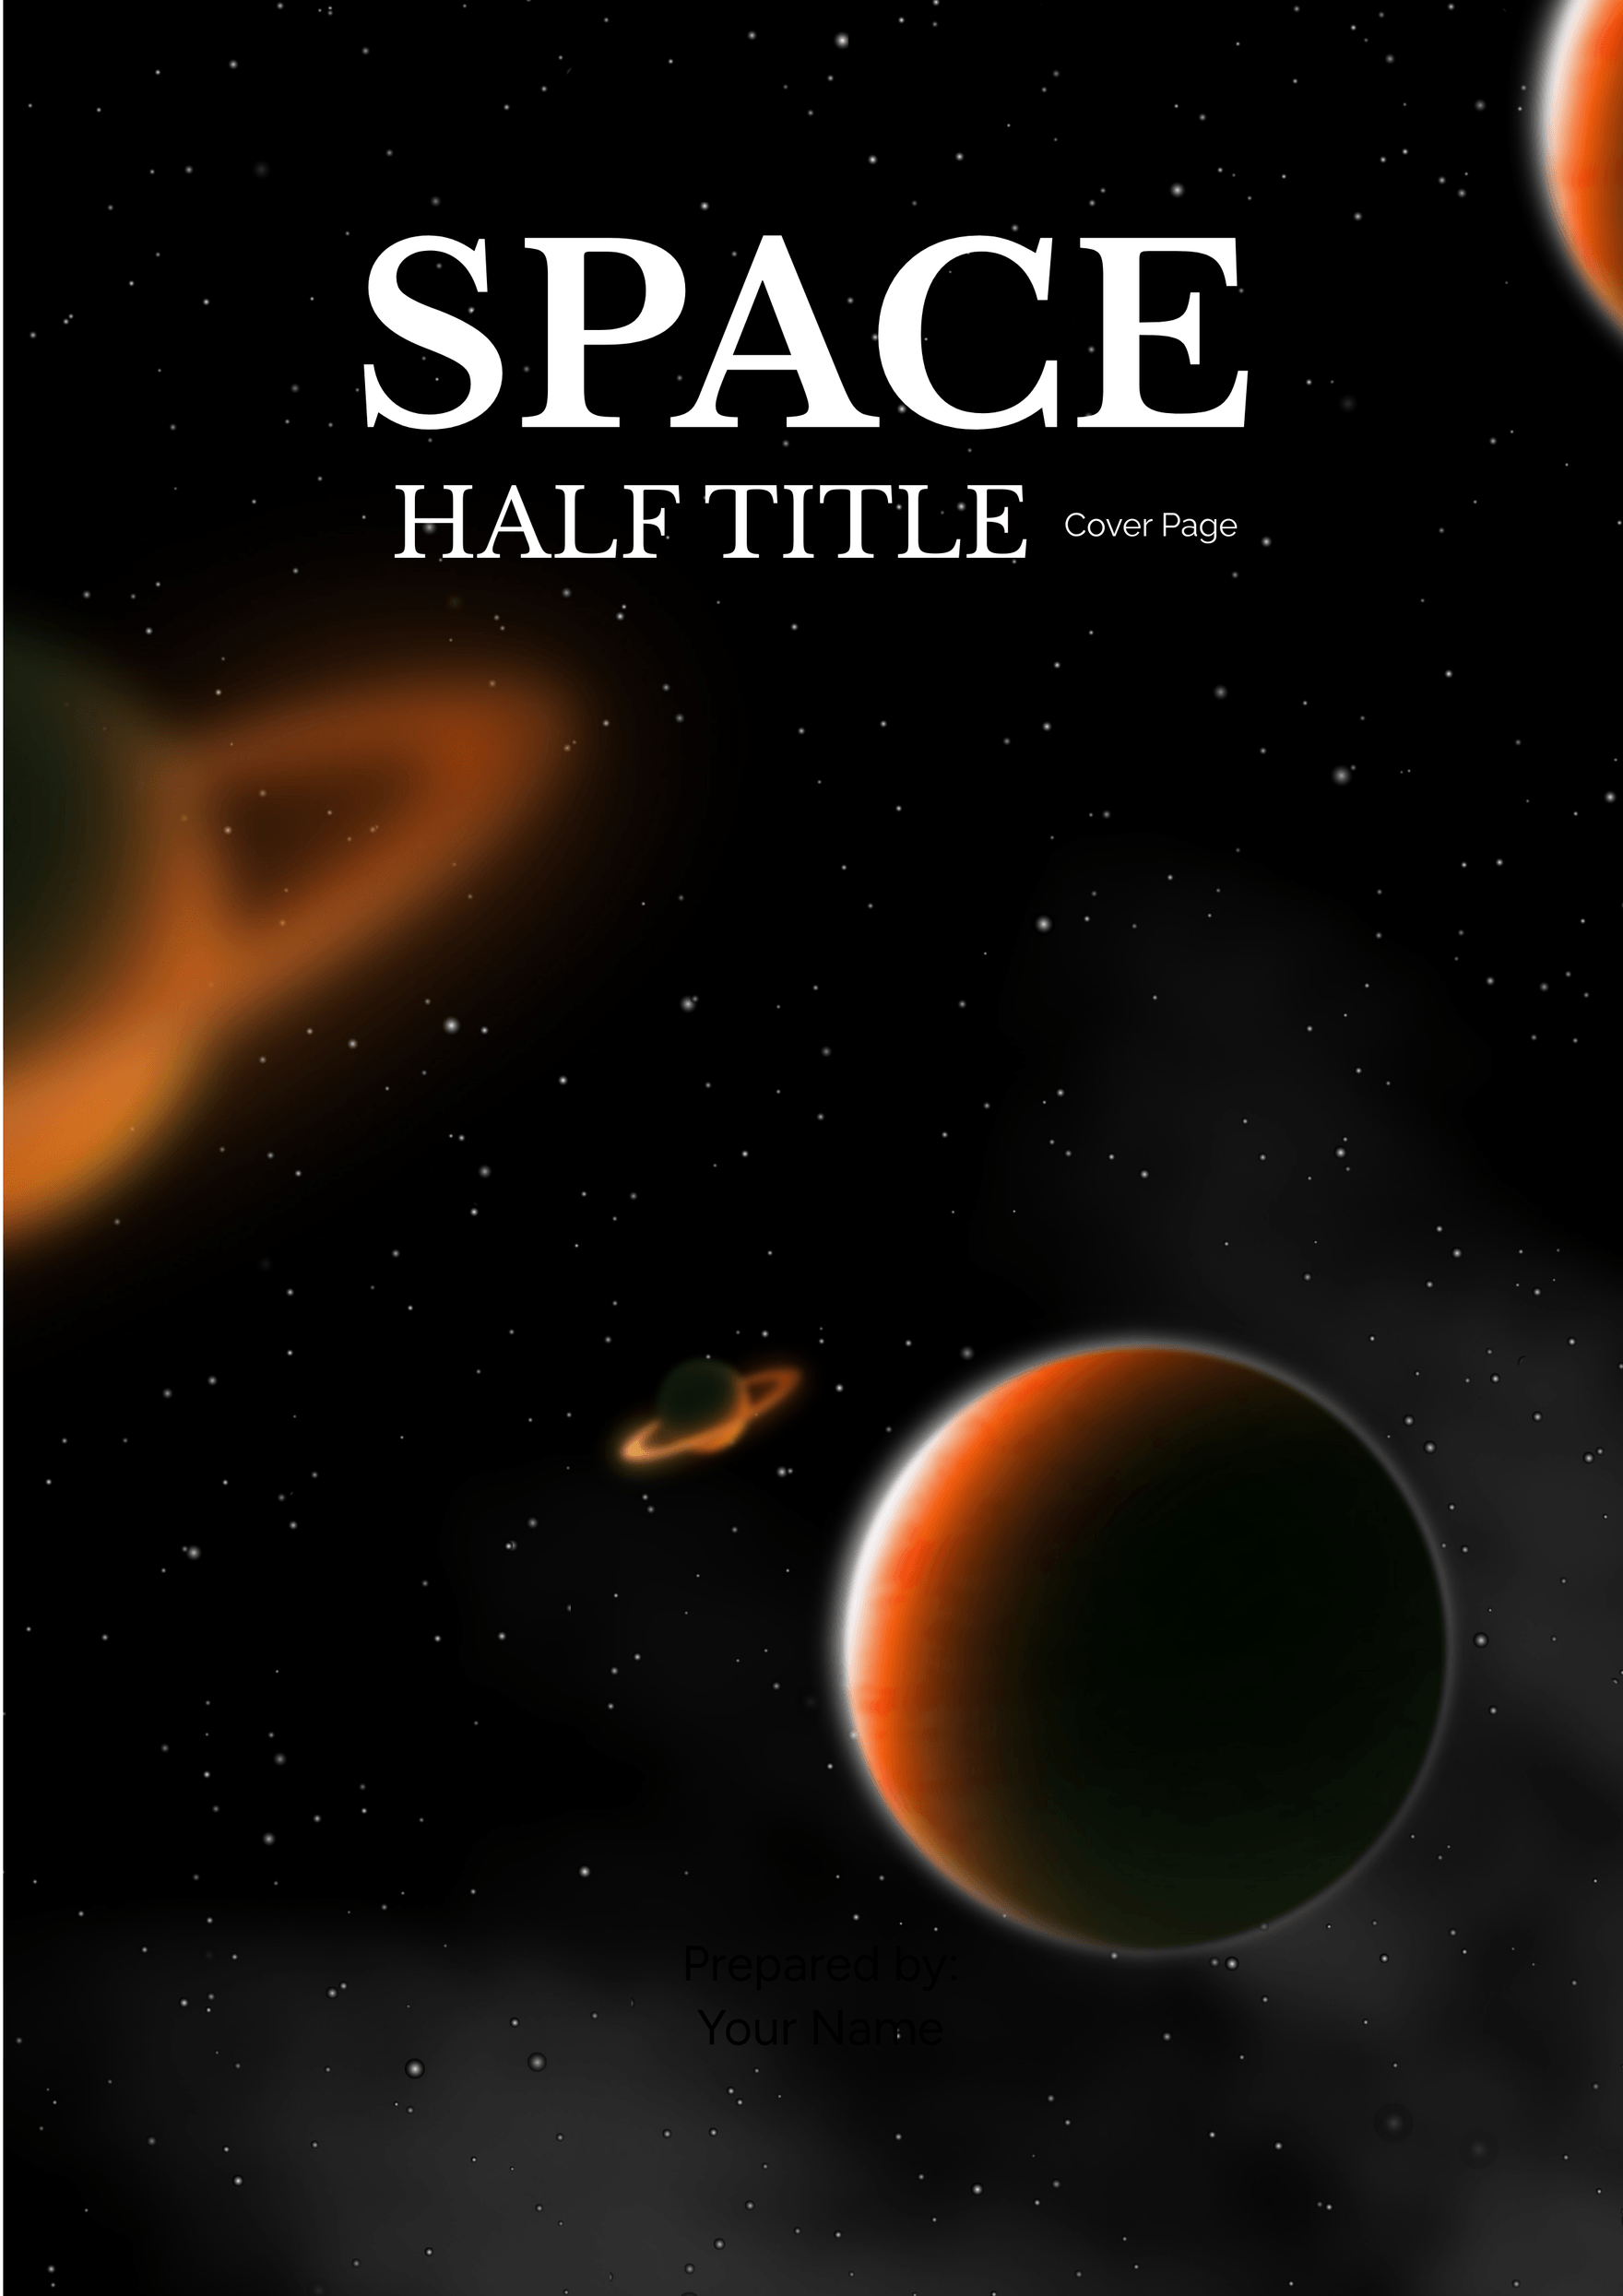 Free Space Half Title Cover Page Template